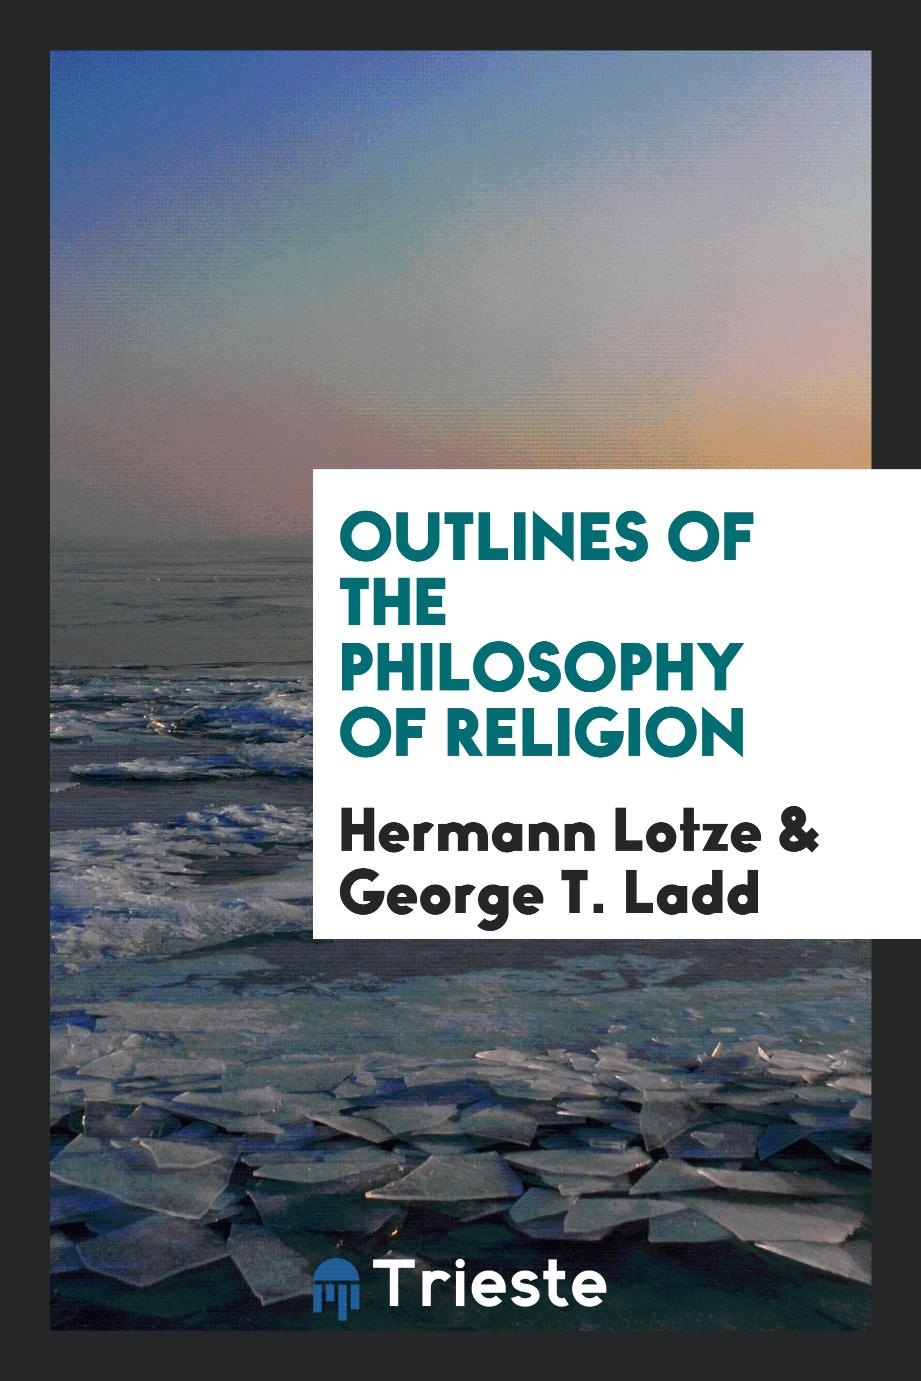 Outlines of the Philosophy of Religion